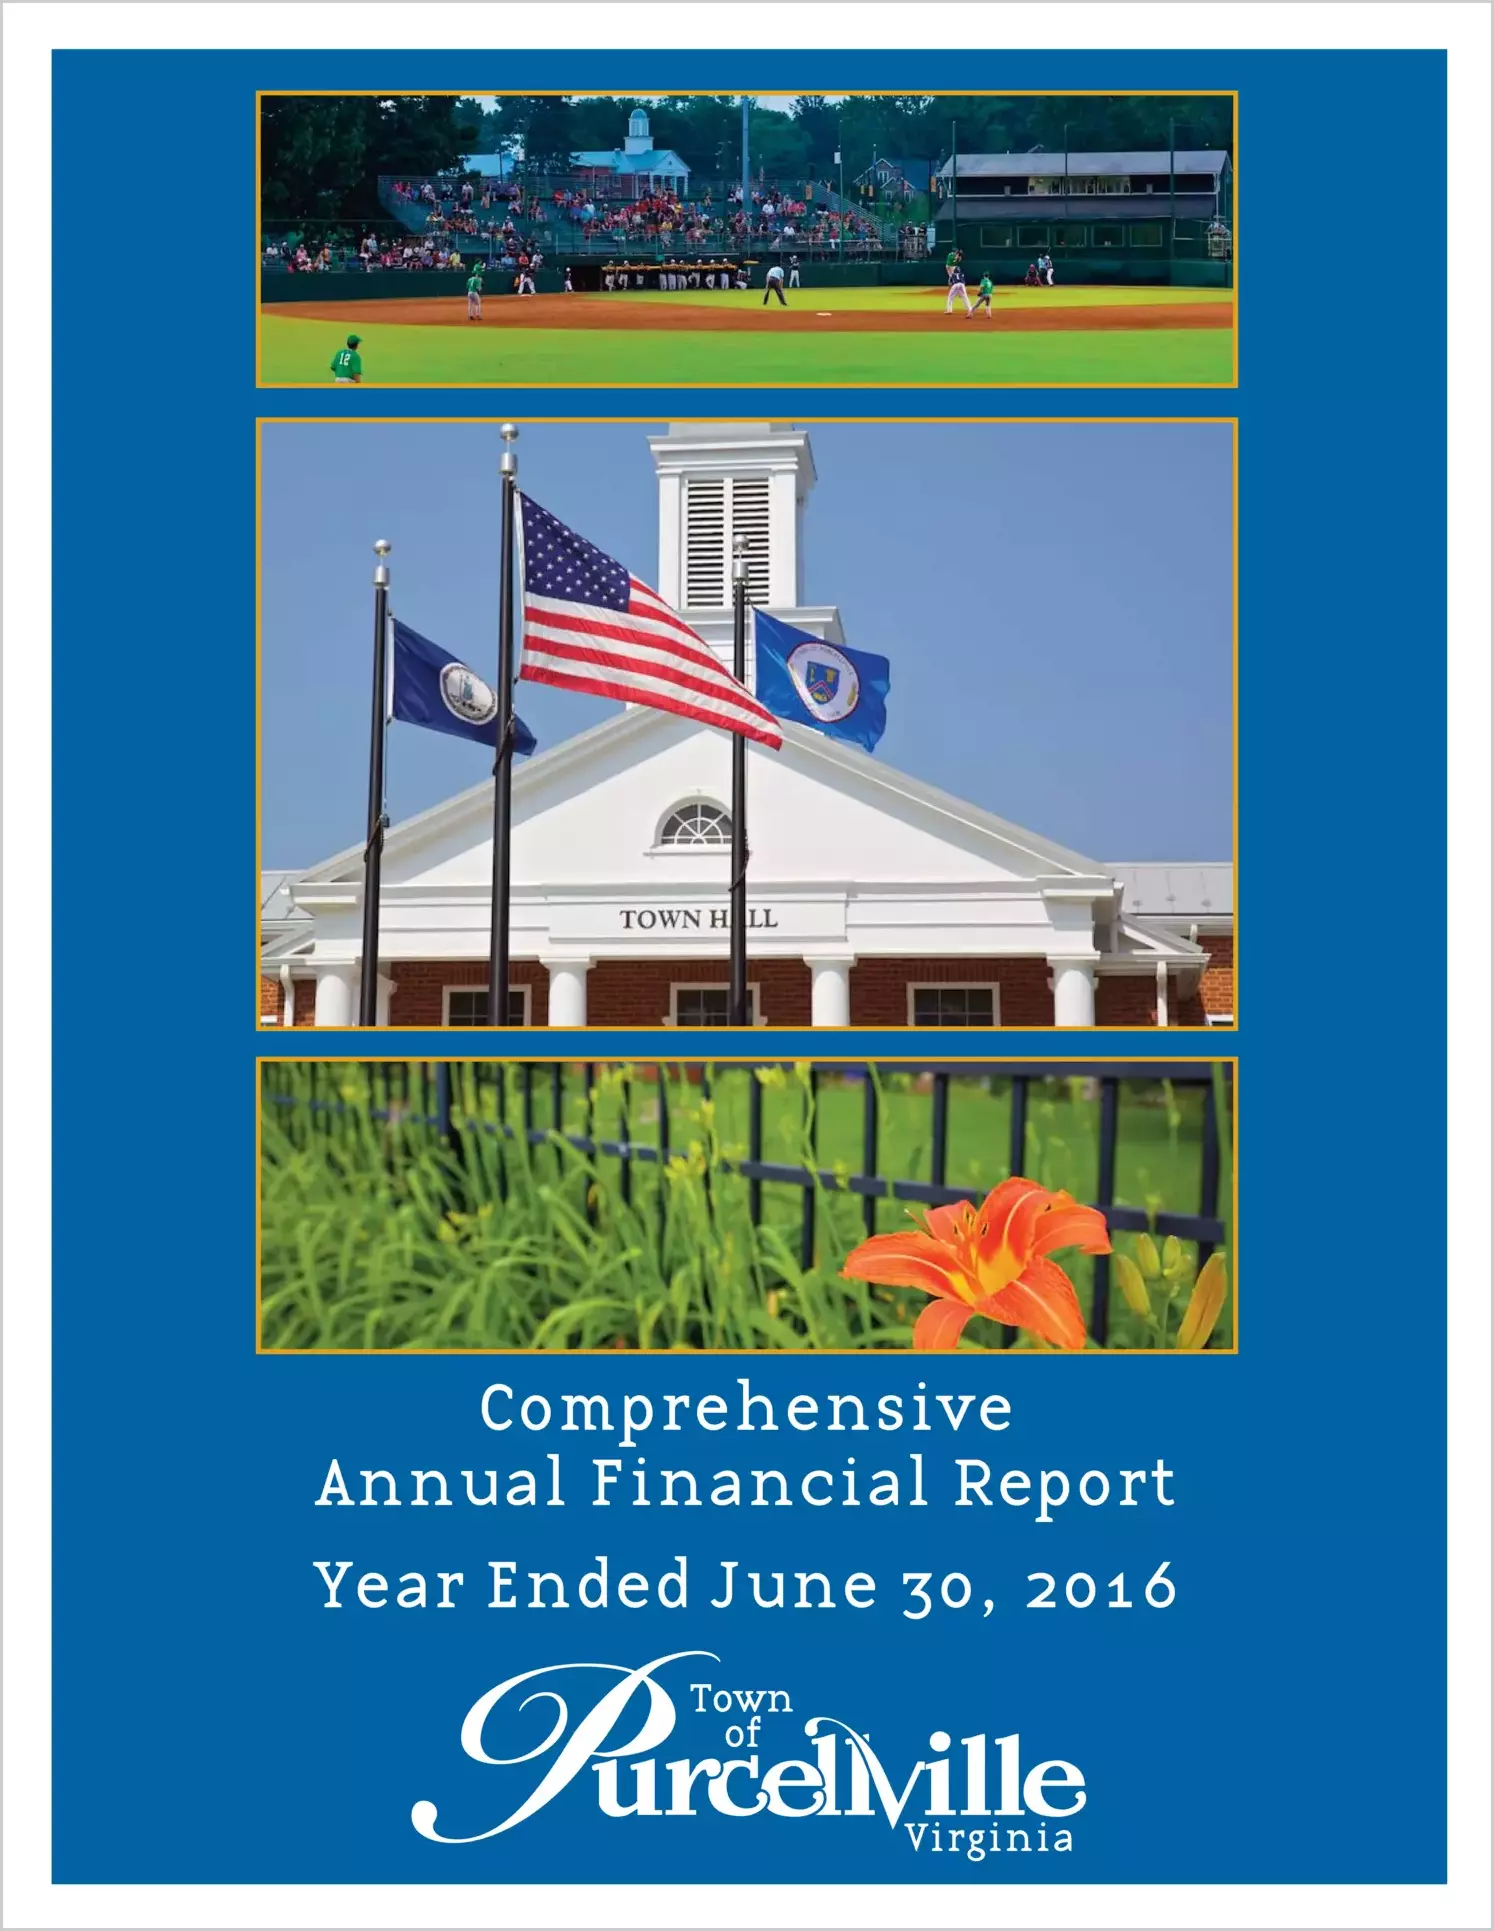 2016 Annual Financial Report for Town of Purcellville